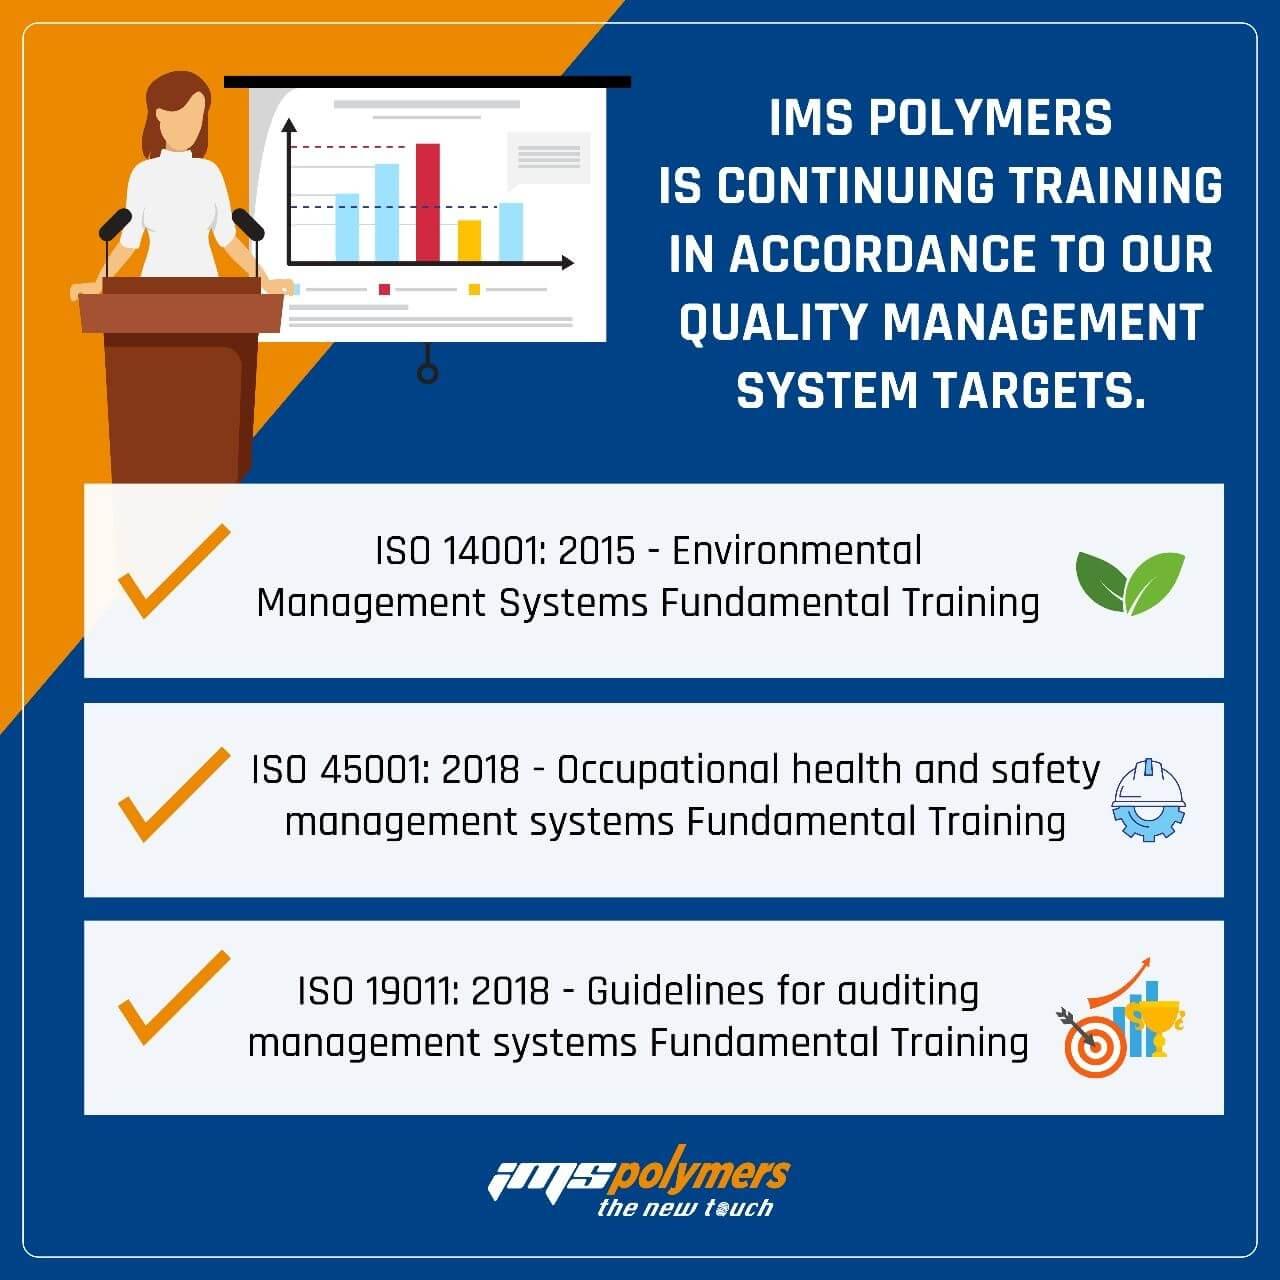 IMS Polymers is continuing training in accordance to our quality management system targets